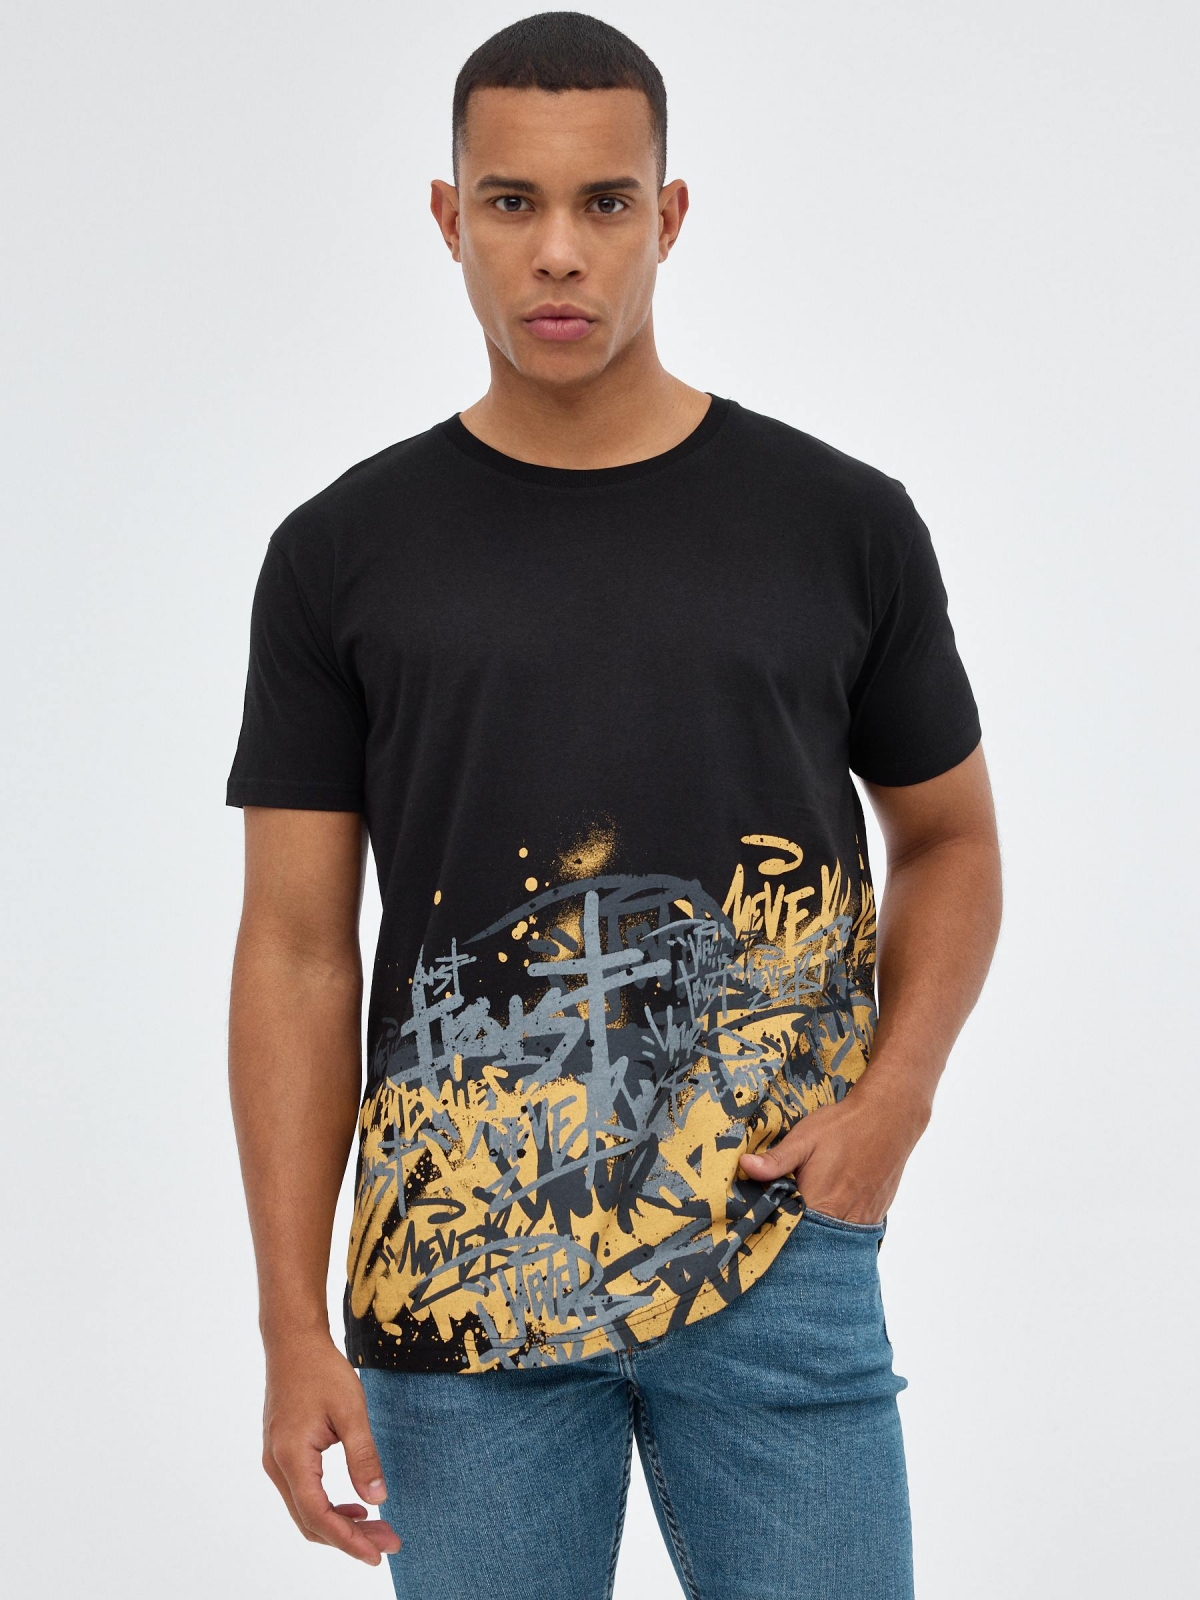 Black t-shirt with graffiti print black middle front view